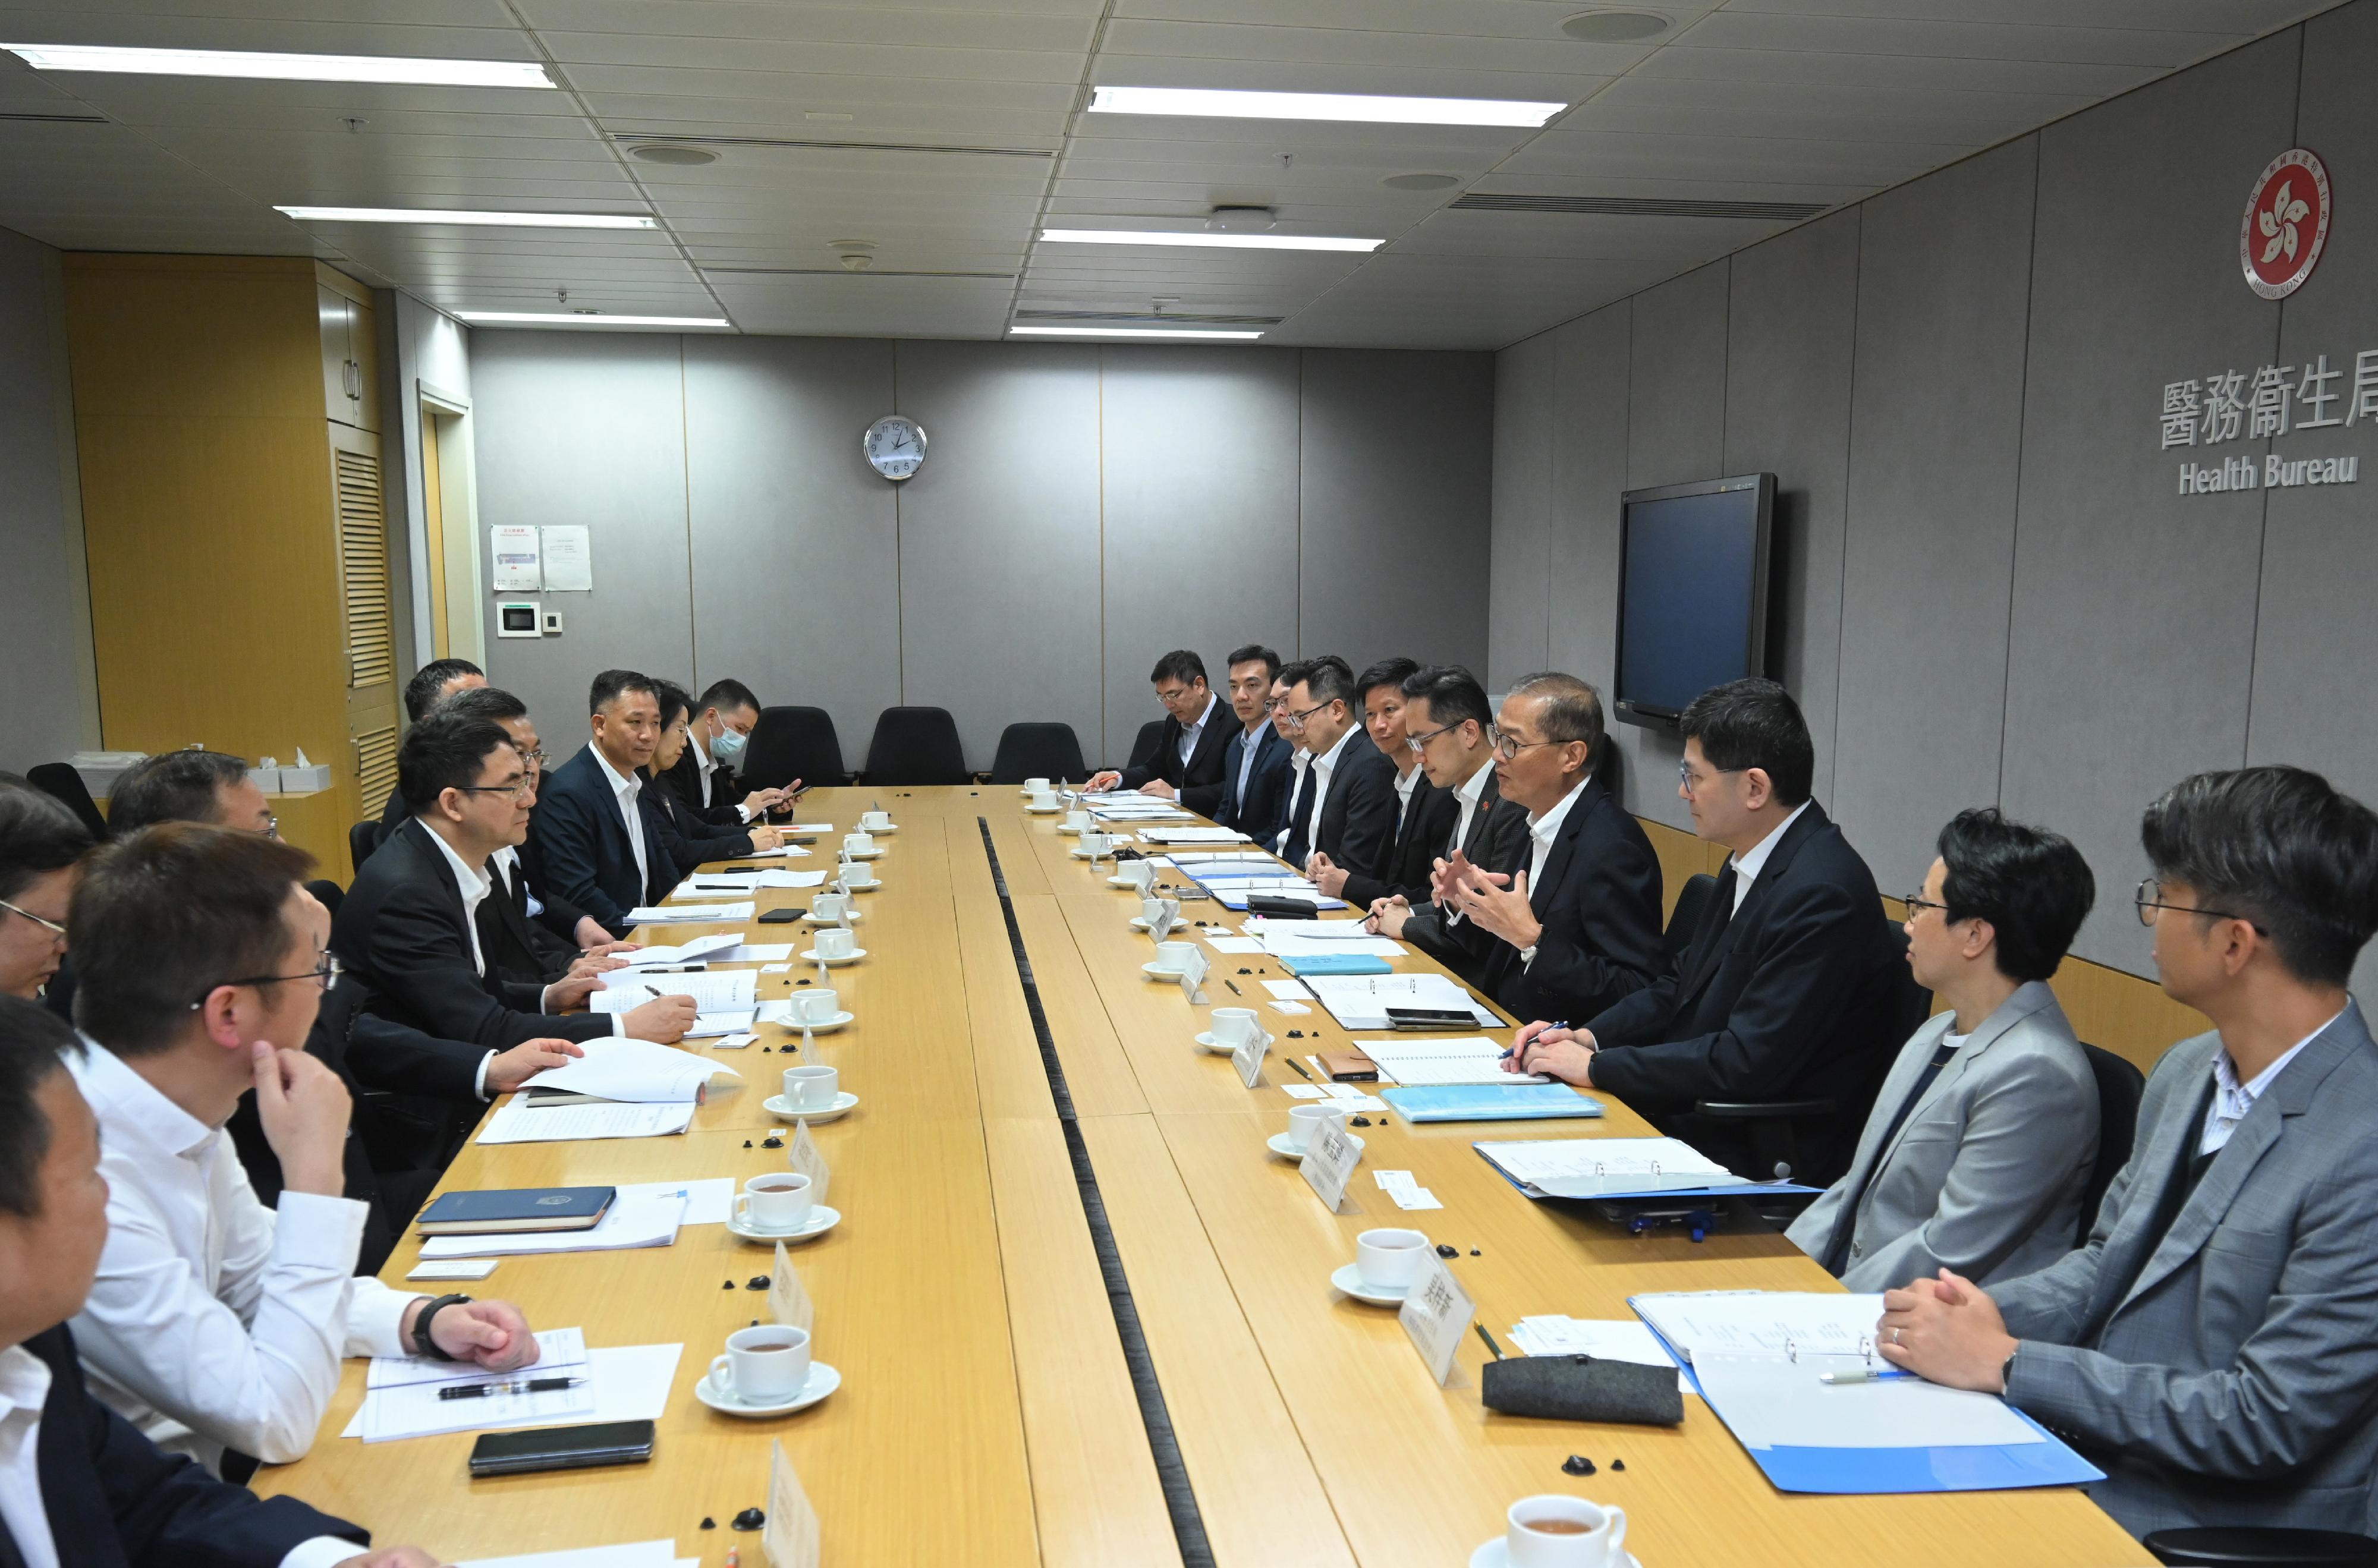 The Secretary for Health, Professor Lo Chung-mau (fourth right), met with a delegation led by the Vice-Mayor of the People’s Government of Guangzhou Municipality and Director General of Guangzhou Municipal Health Commission, Mr Lai Zhihong (fifth left), at the Central Government Offices today (May 4). The Director of Health, Dr Ronald Lam (fifth right); the Chief Executive of the Hospital Authority, Dr Tony Ko (third right); and the Deputy Secretaries for Health Mr Sam Hui (sixth right) and Mr Eddie Lee (seventh right) also attended.